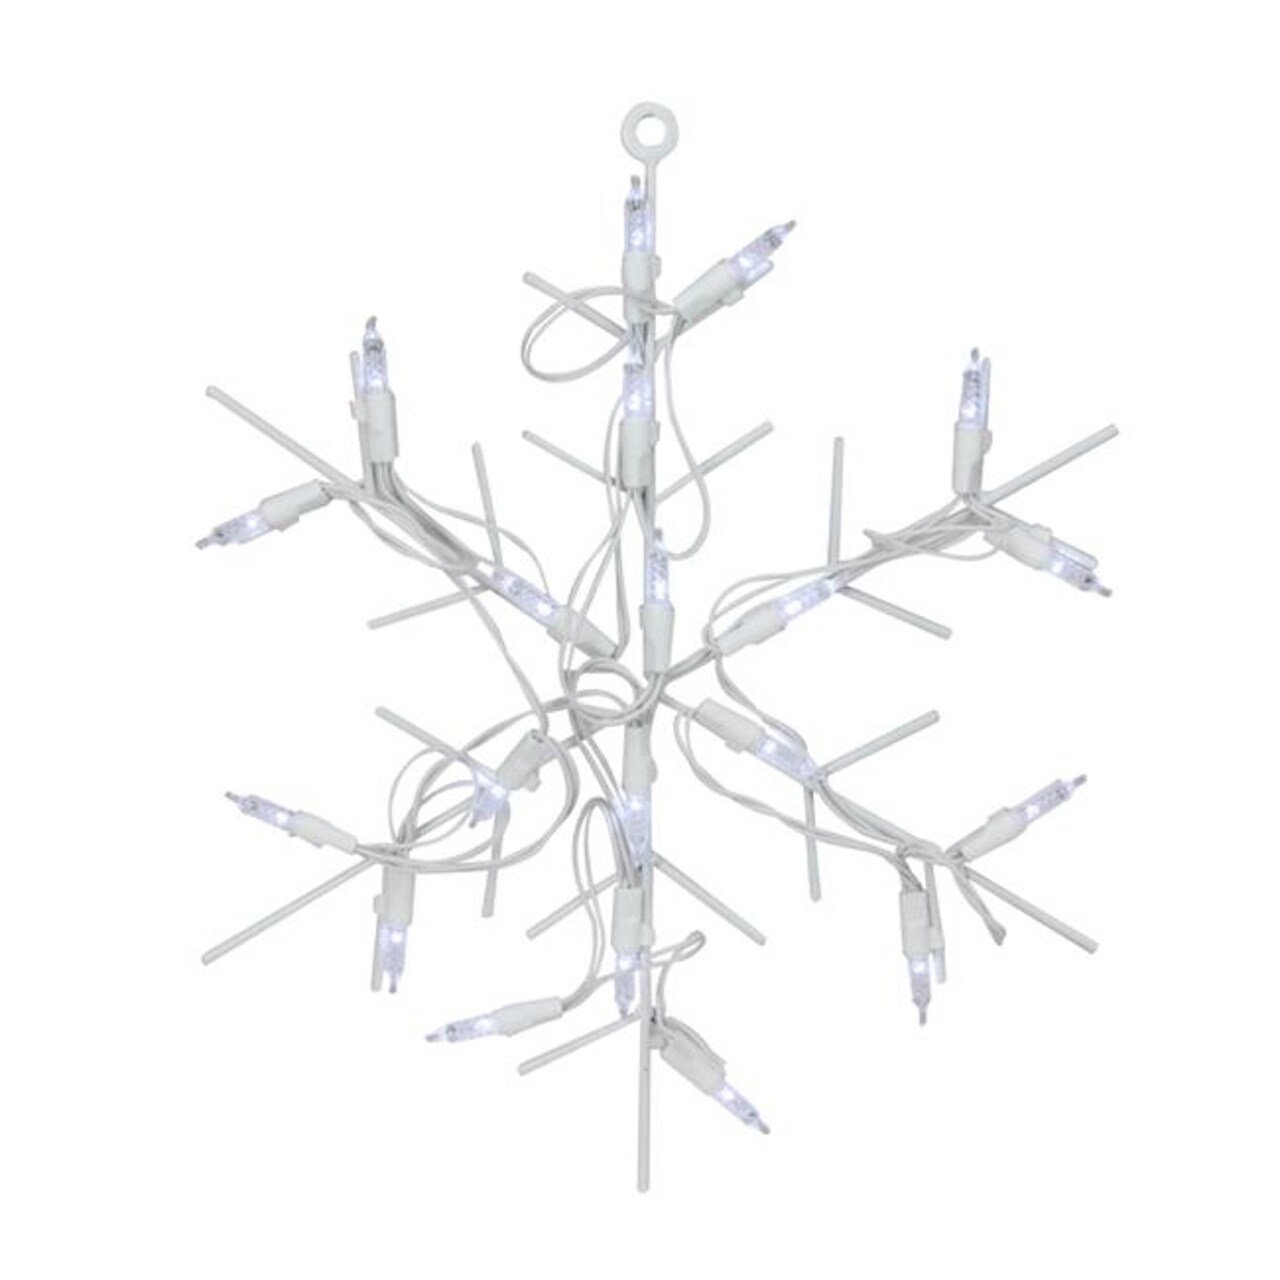 Northlight 32913630 12 in. Battery Operated LED Lighted Snowflake Christmas Window Silhouette with Timer